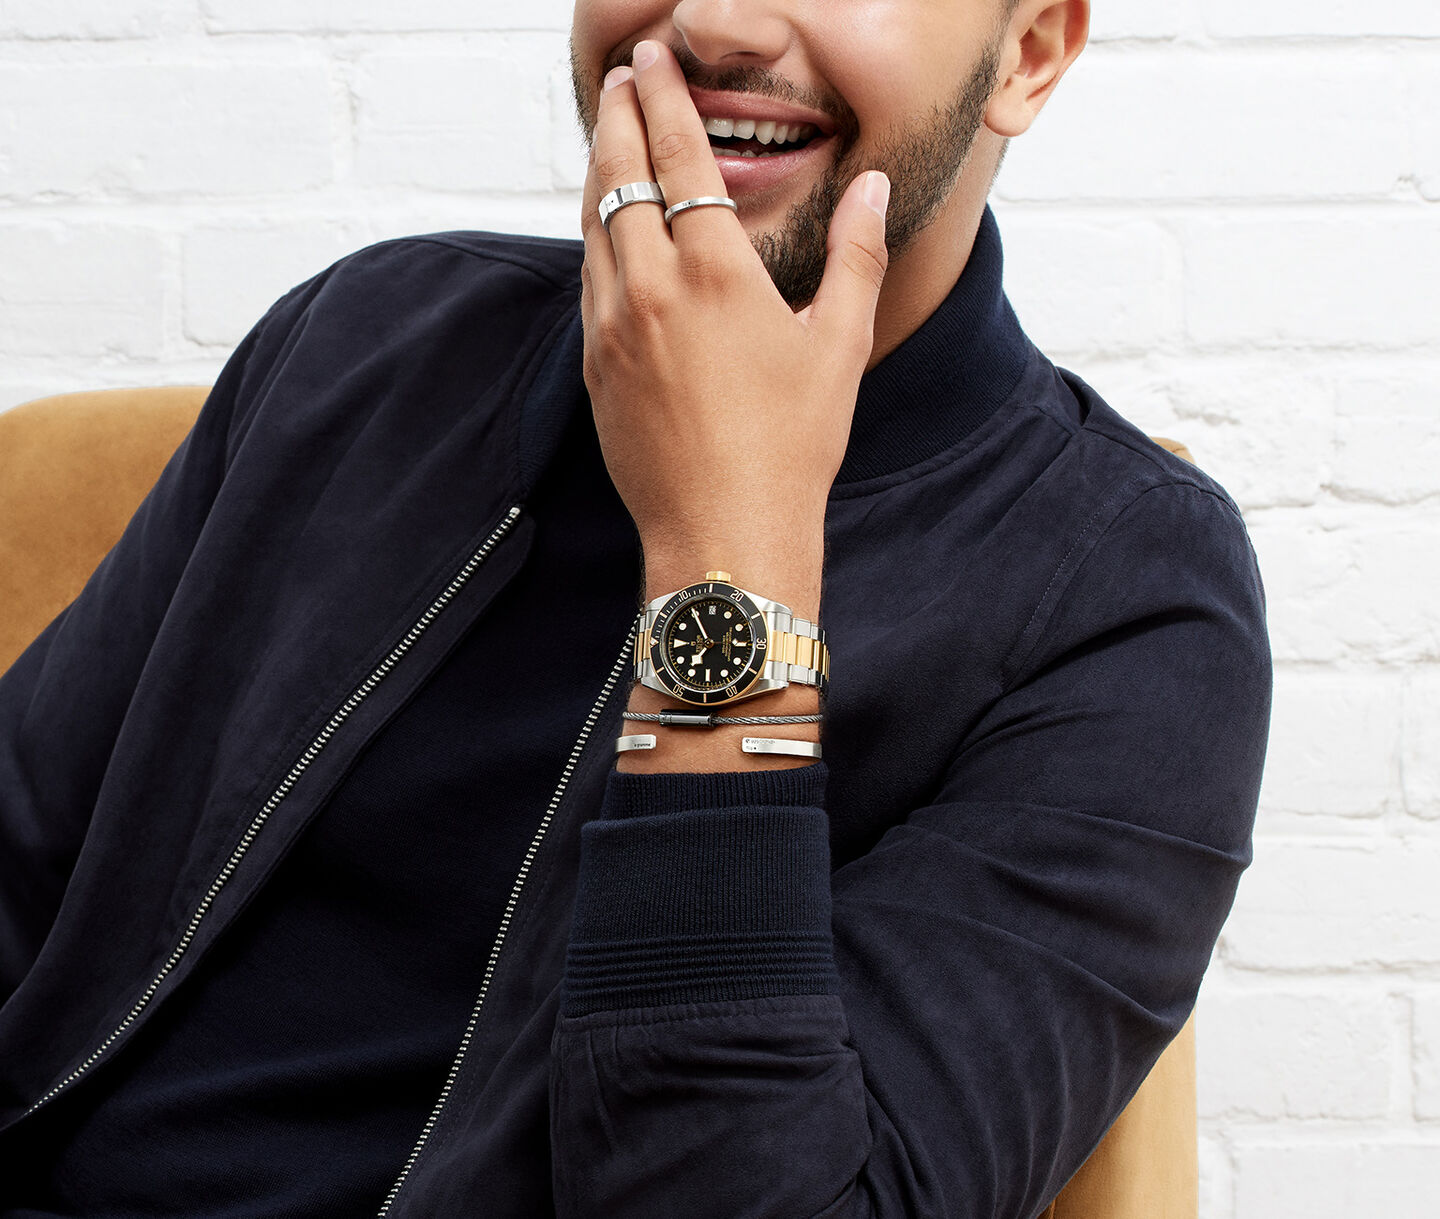 A man wearing a Tudor Black Bay watch and le gramme bracelets